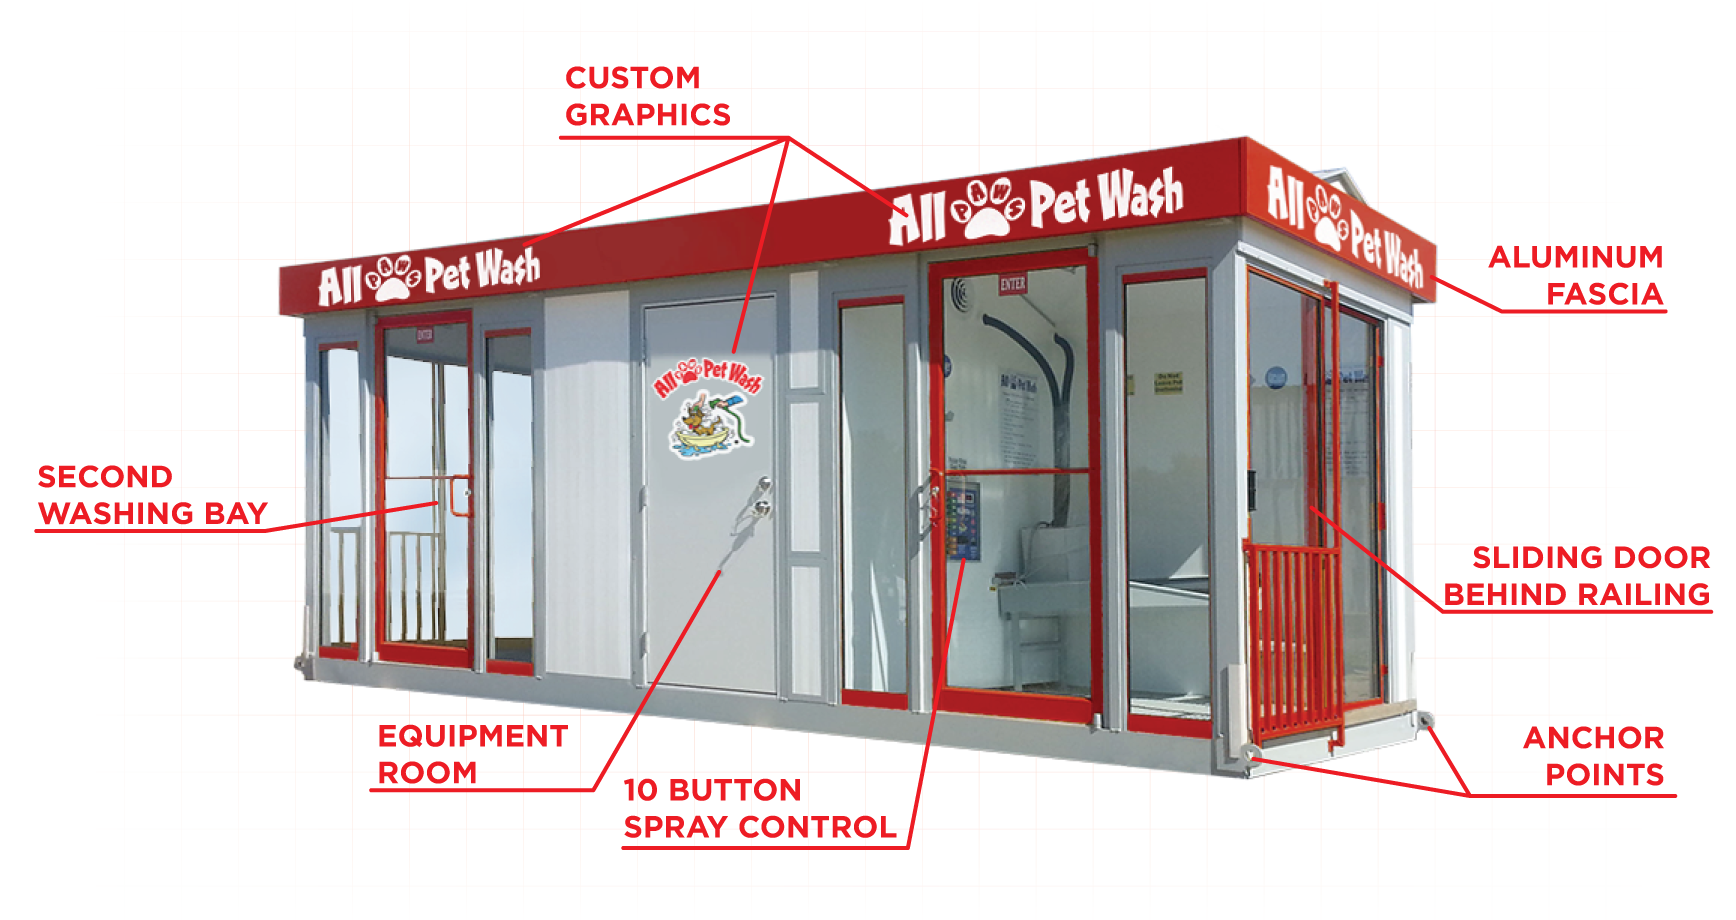 a drawing of an all pet wash shows its features